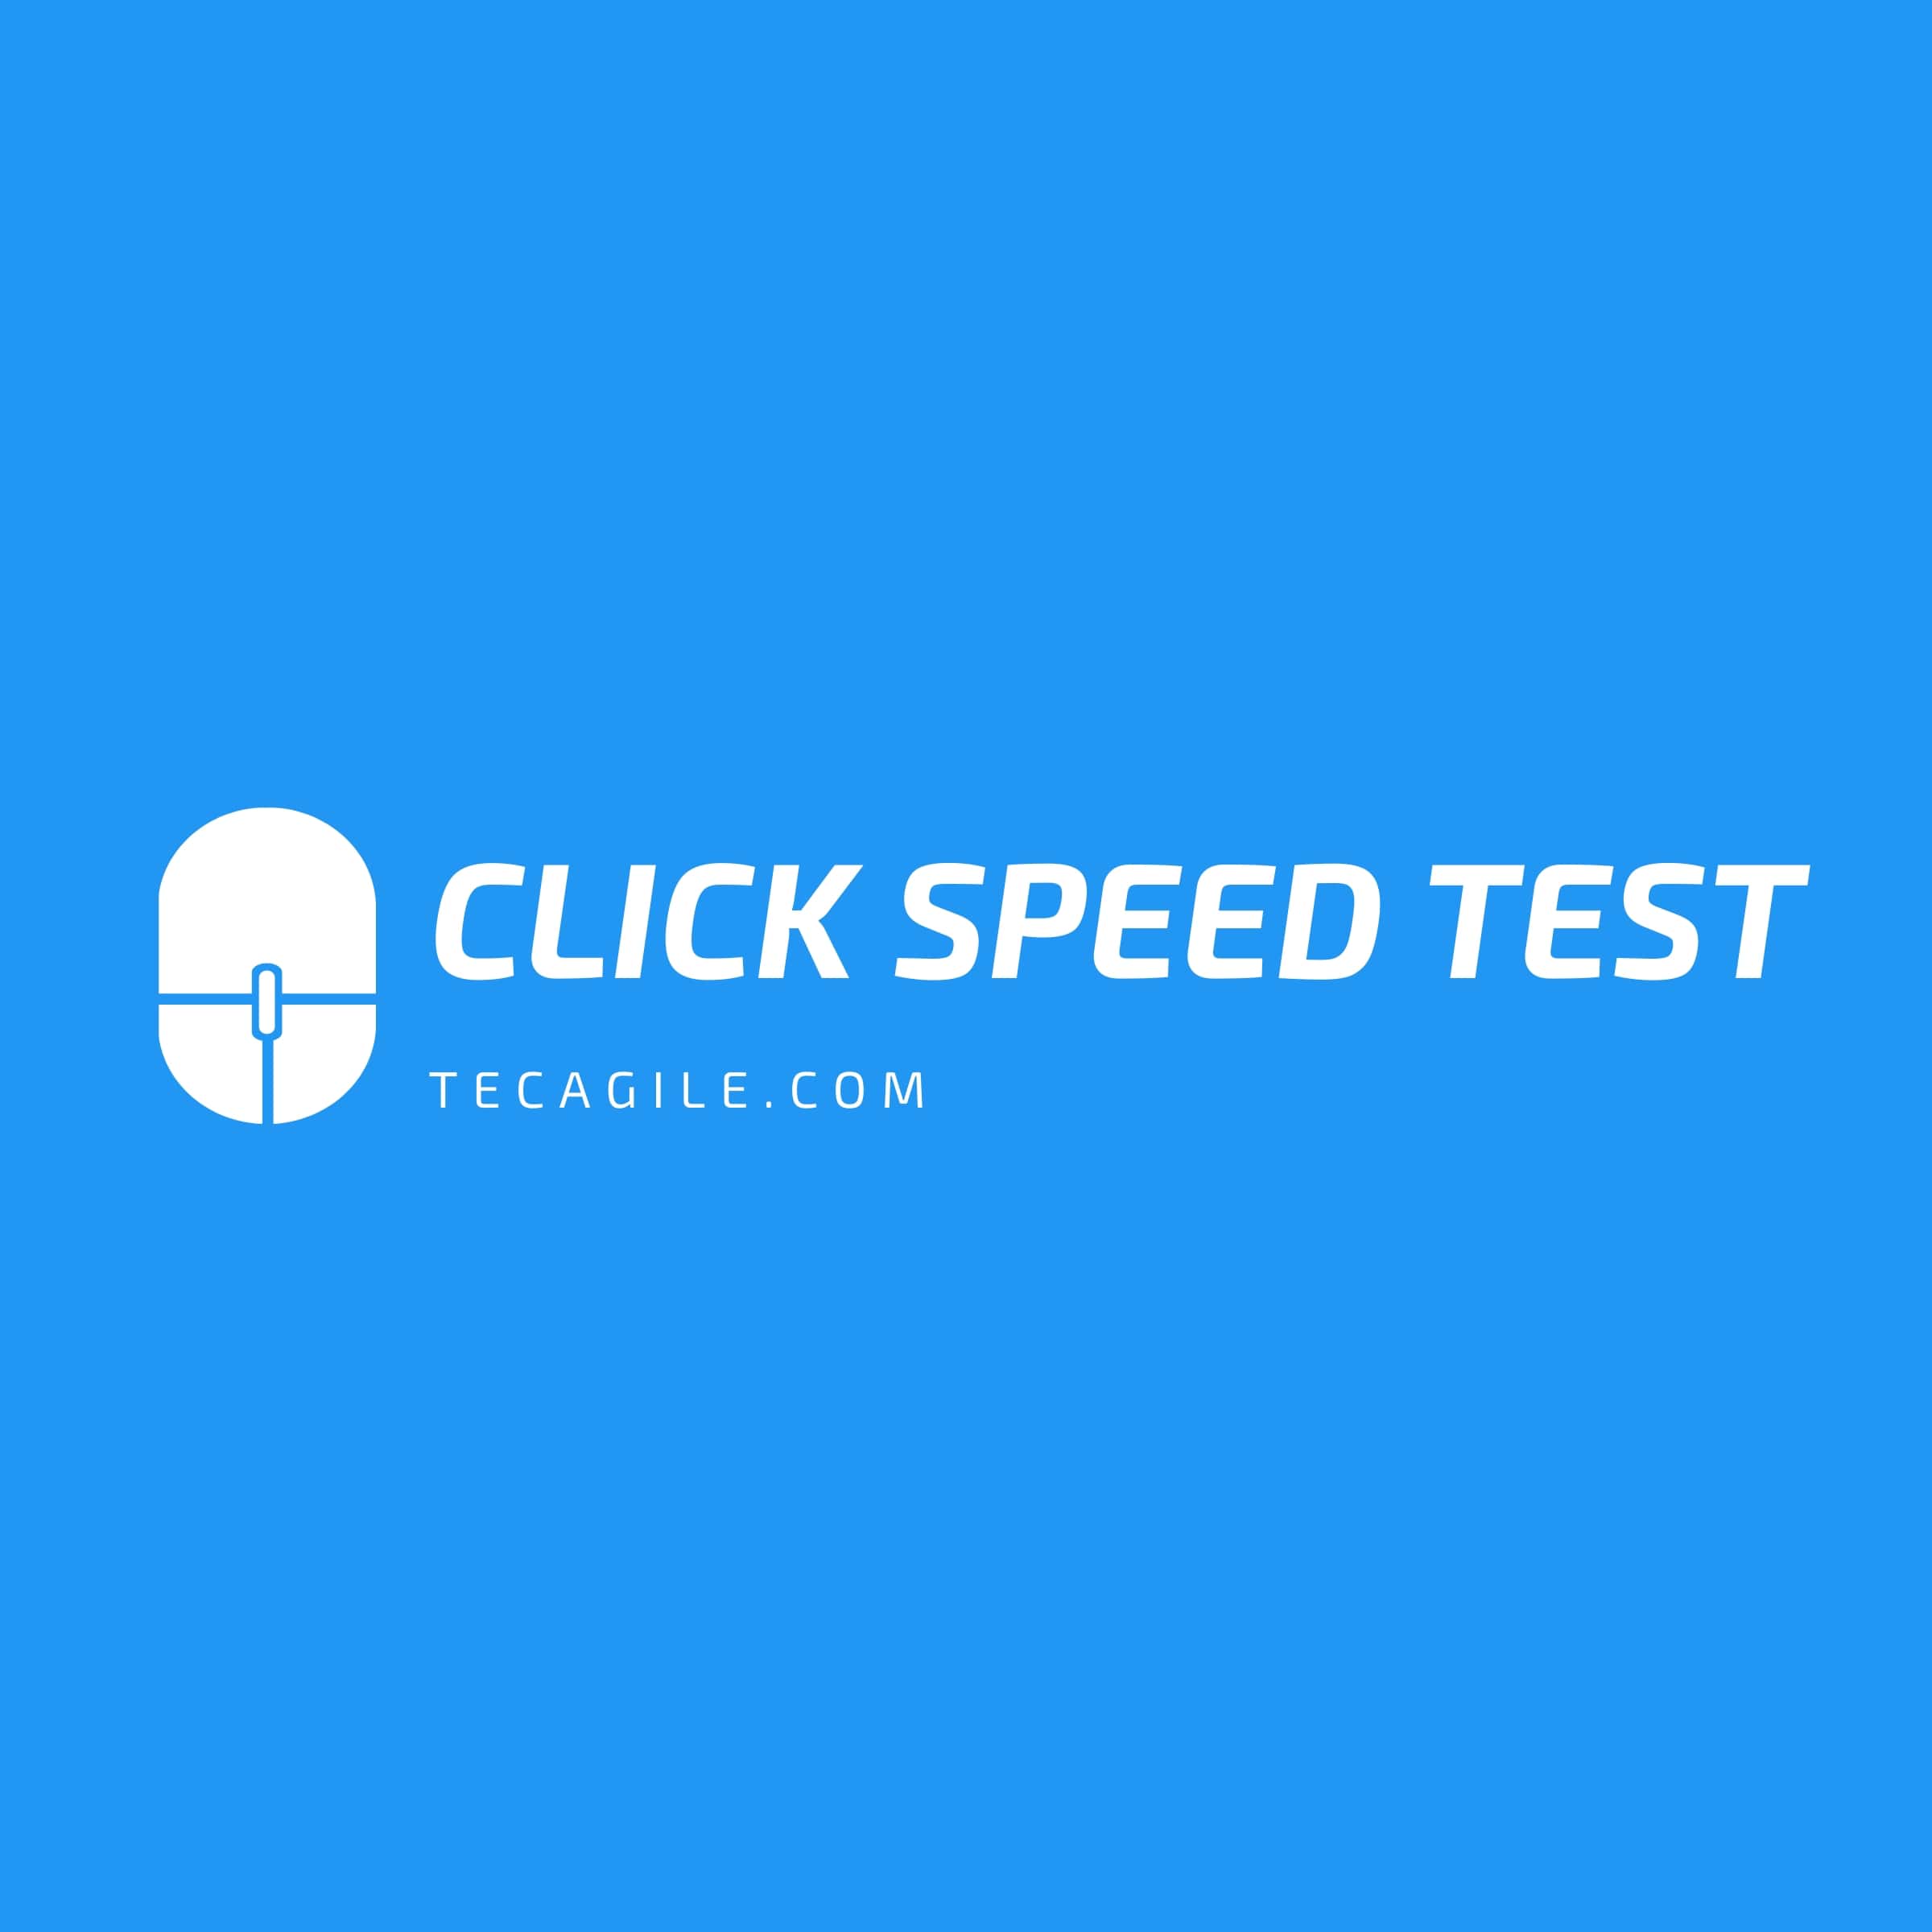 online-click-speed-test-set-time-which-you-want-exclusive